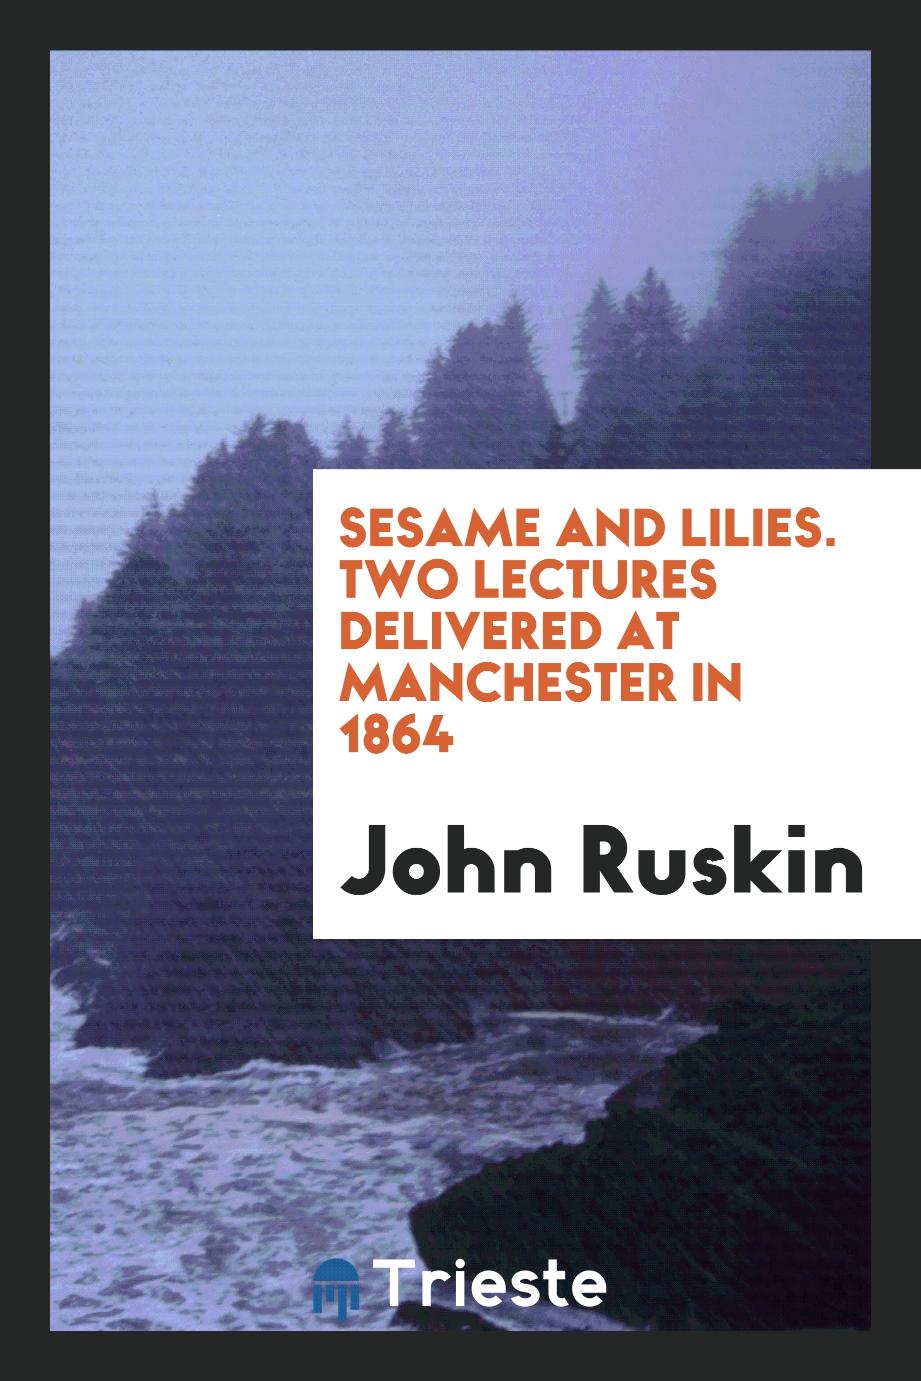 John Ruskin - Sesame and lilies. Two lectures delivered at Manchester in 1864